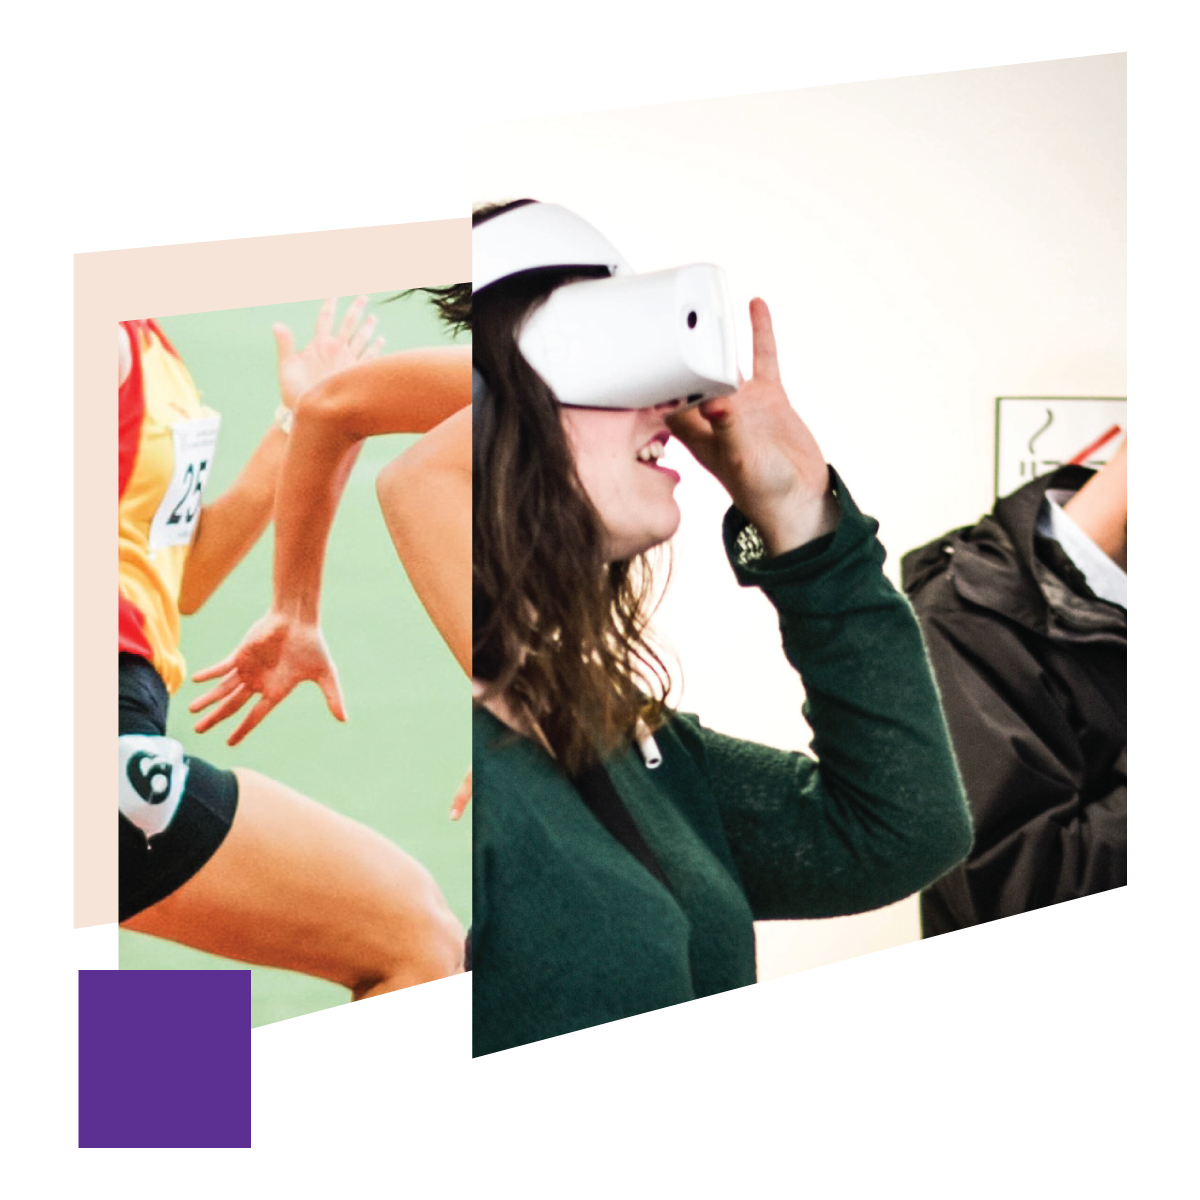 A collage: 1). A close-up of runners’ limbs; 2). A woman using a VR set.